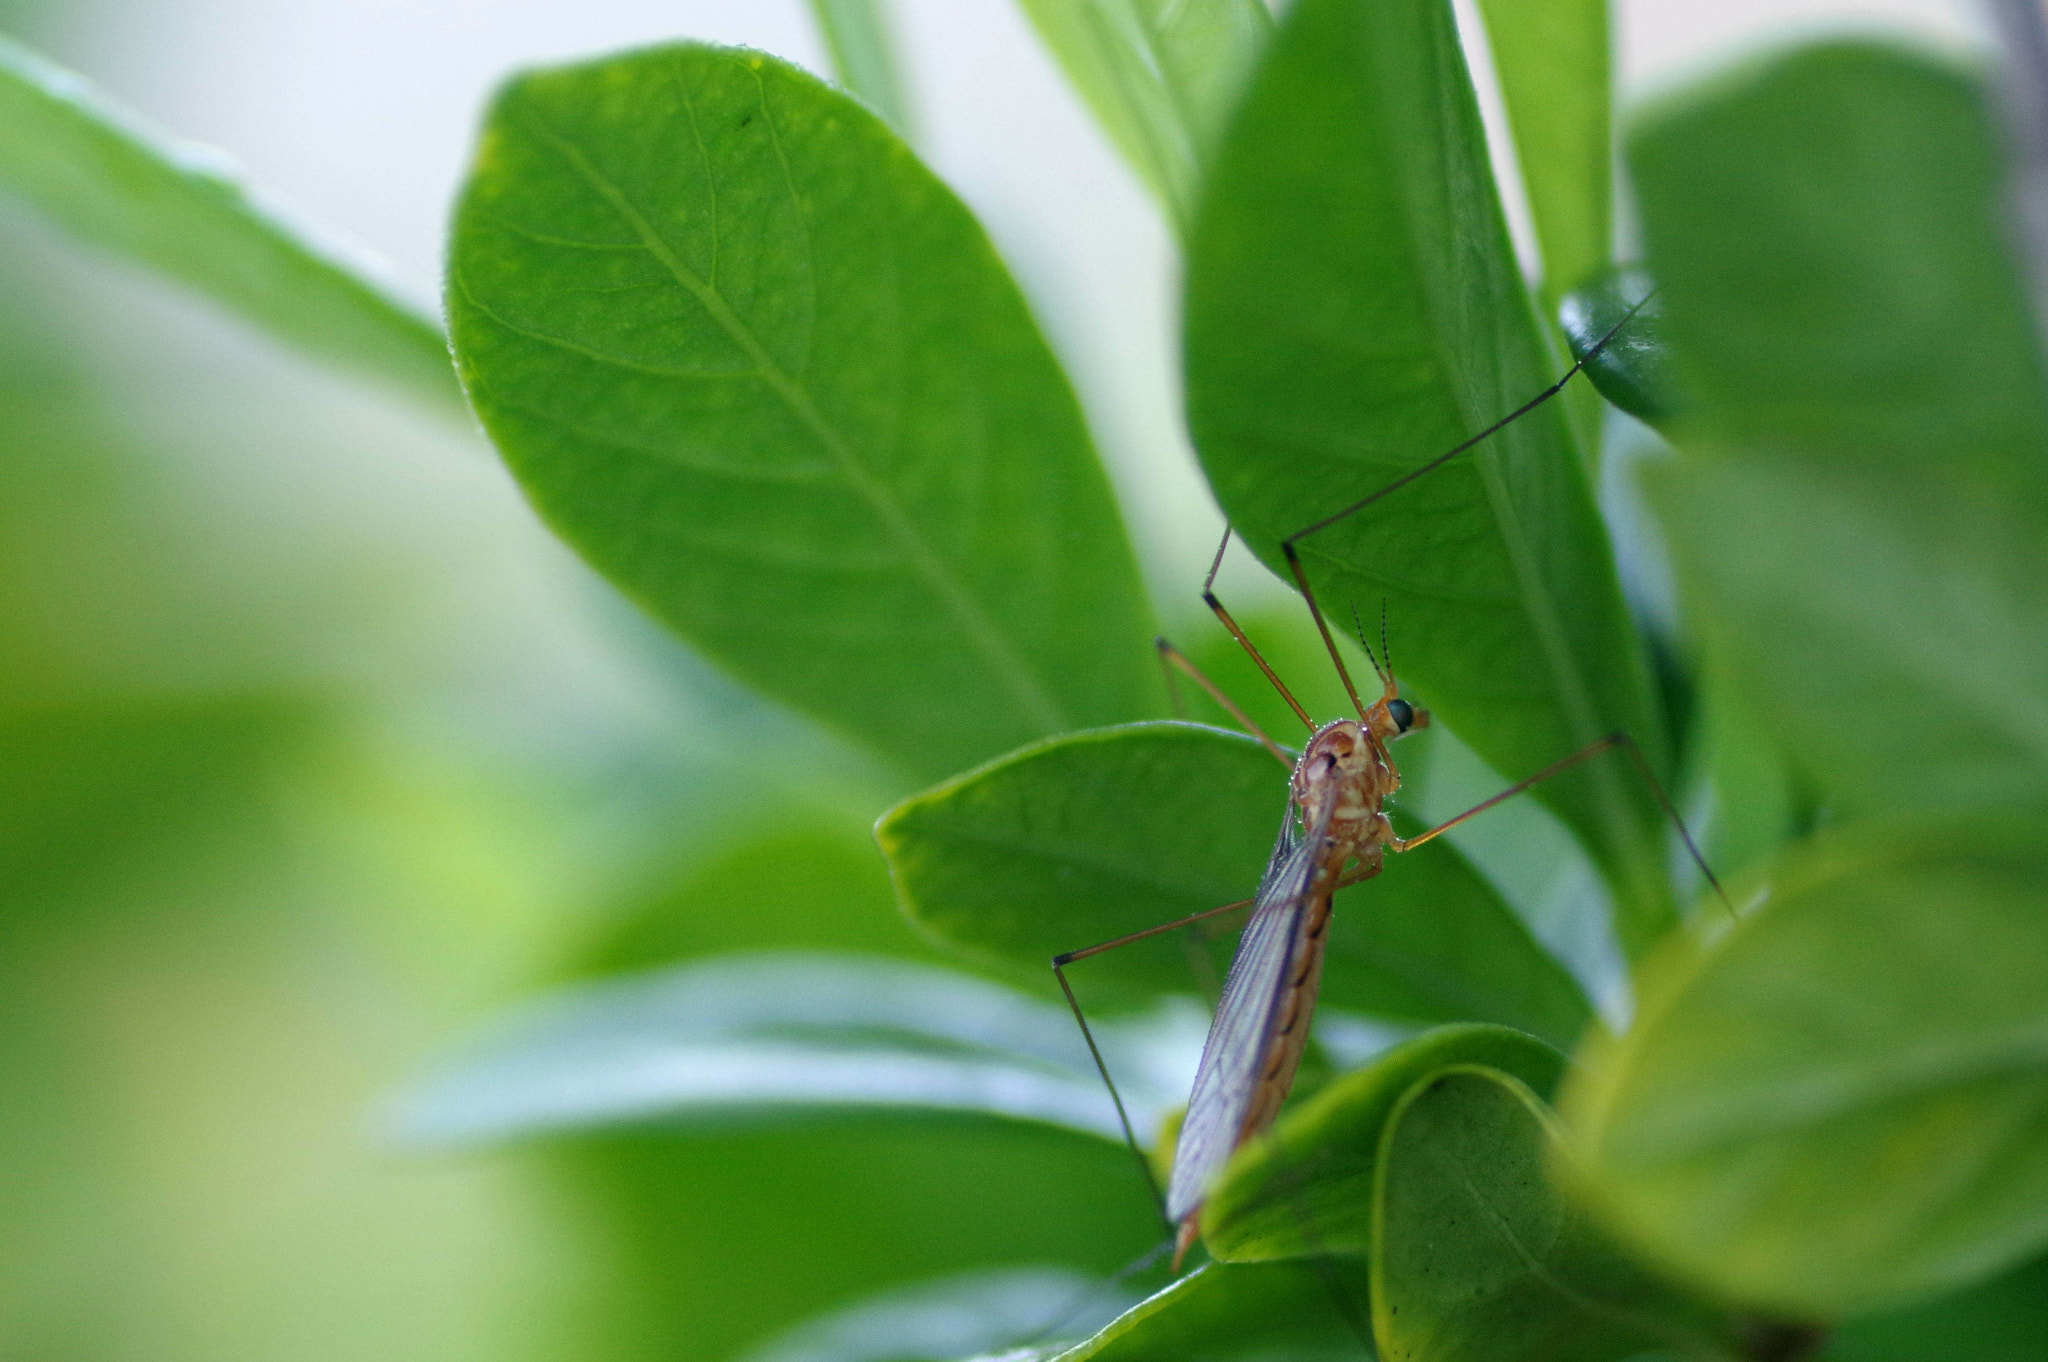 Pentax K-3 sample photo. Mosquito resting on a lemon leaf photography